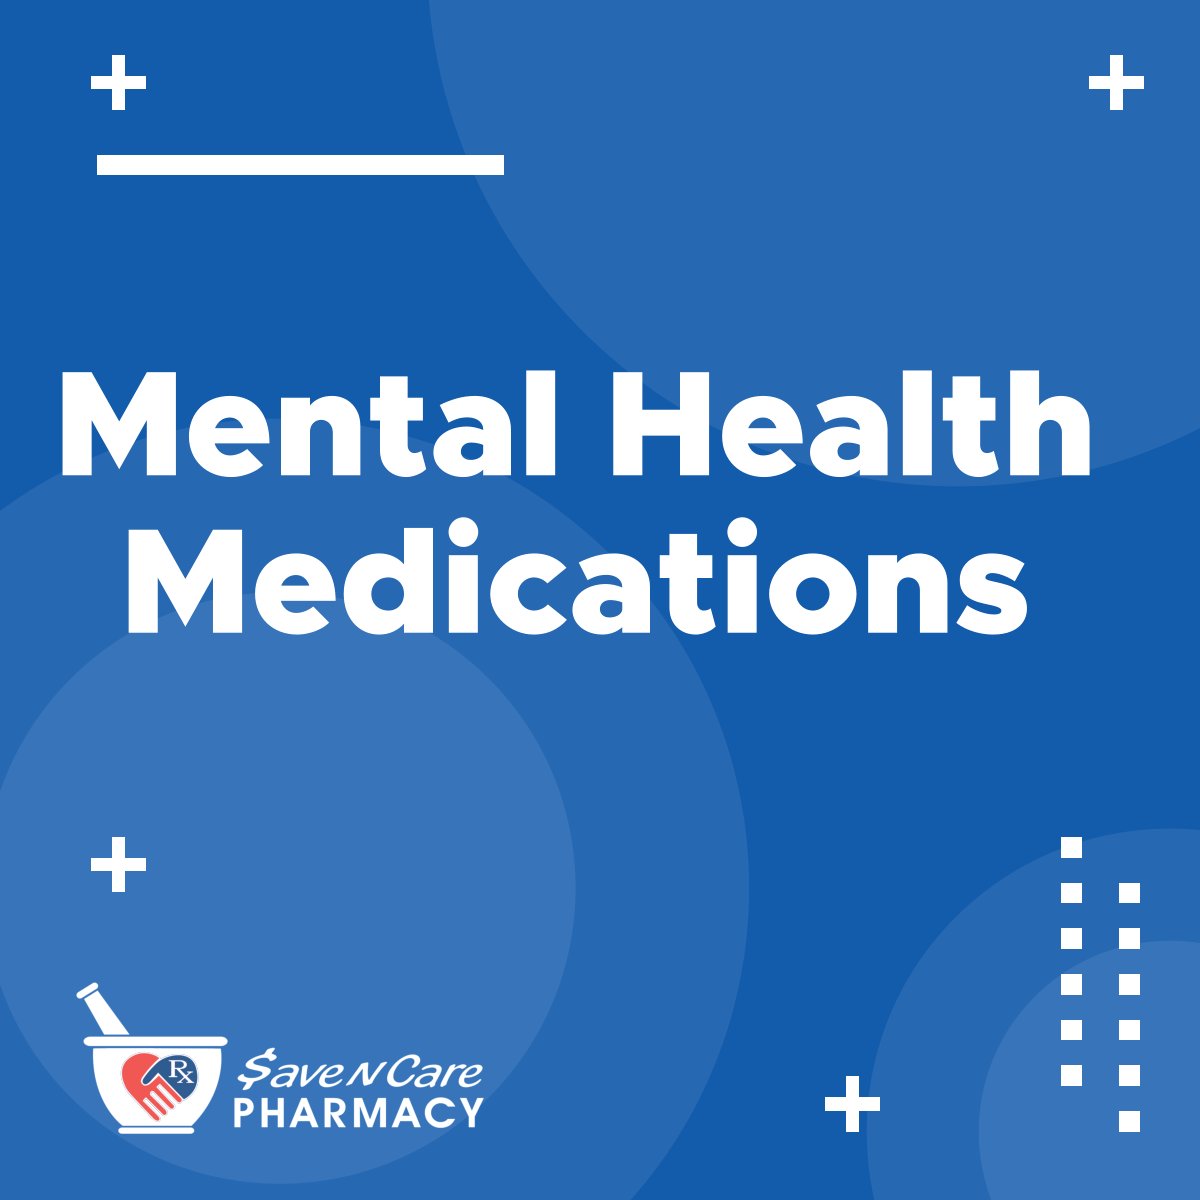 Follow your healthcare provider's instructions and be aware of potential side effects. Communicate with your healthcare team and prioritize self-care and support from loved ones.

#PharmacyServices #HudsonFL #MentalHealth #Medications